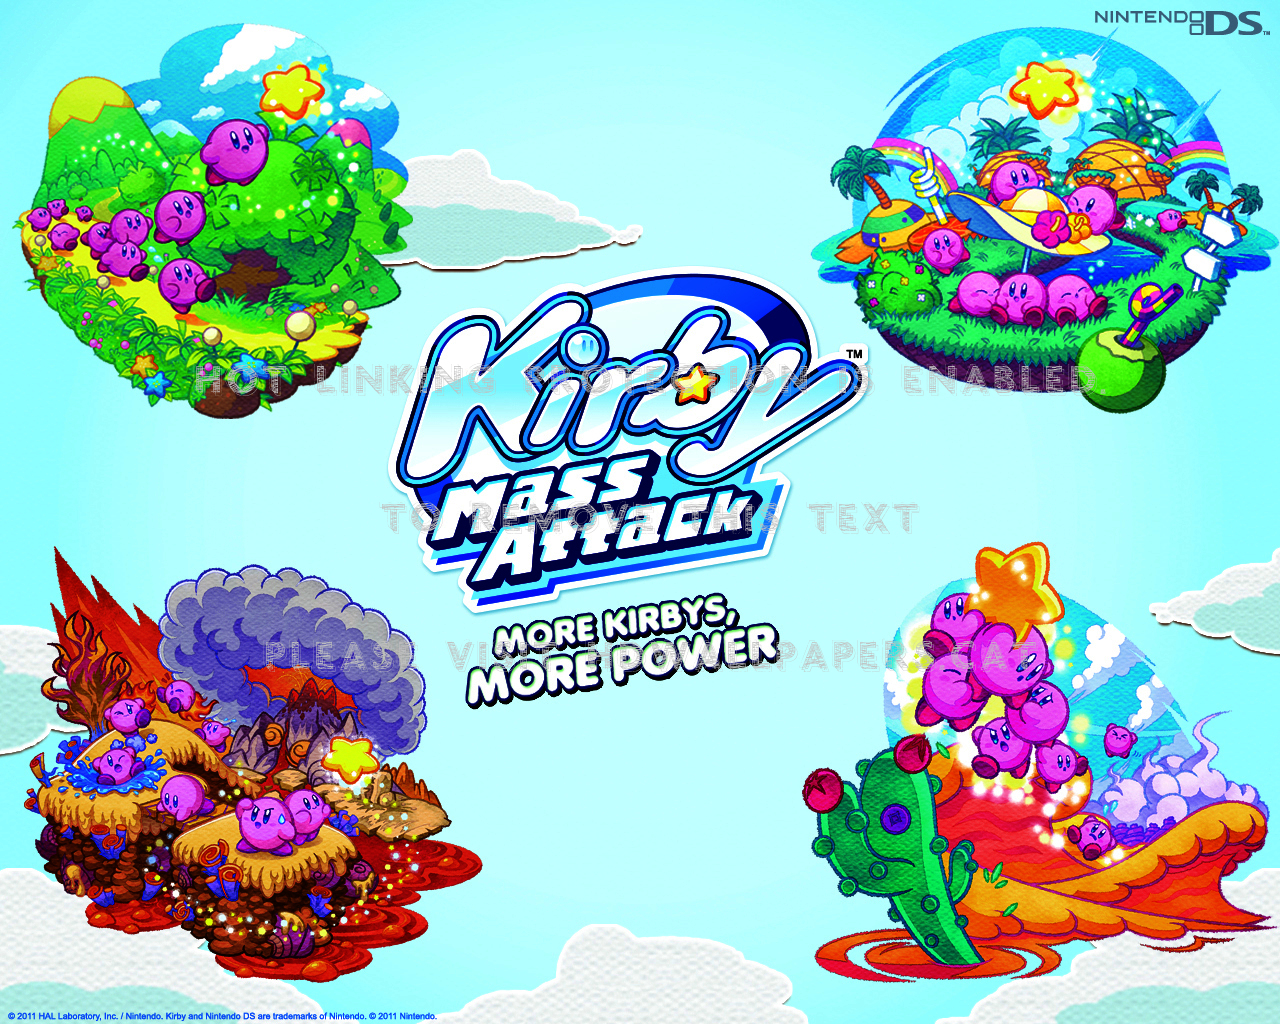 Kirby Mass Attack Ratings , HD Wallpaper & Backgrounds